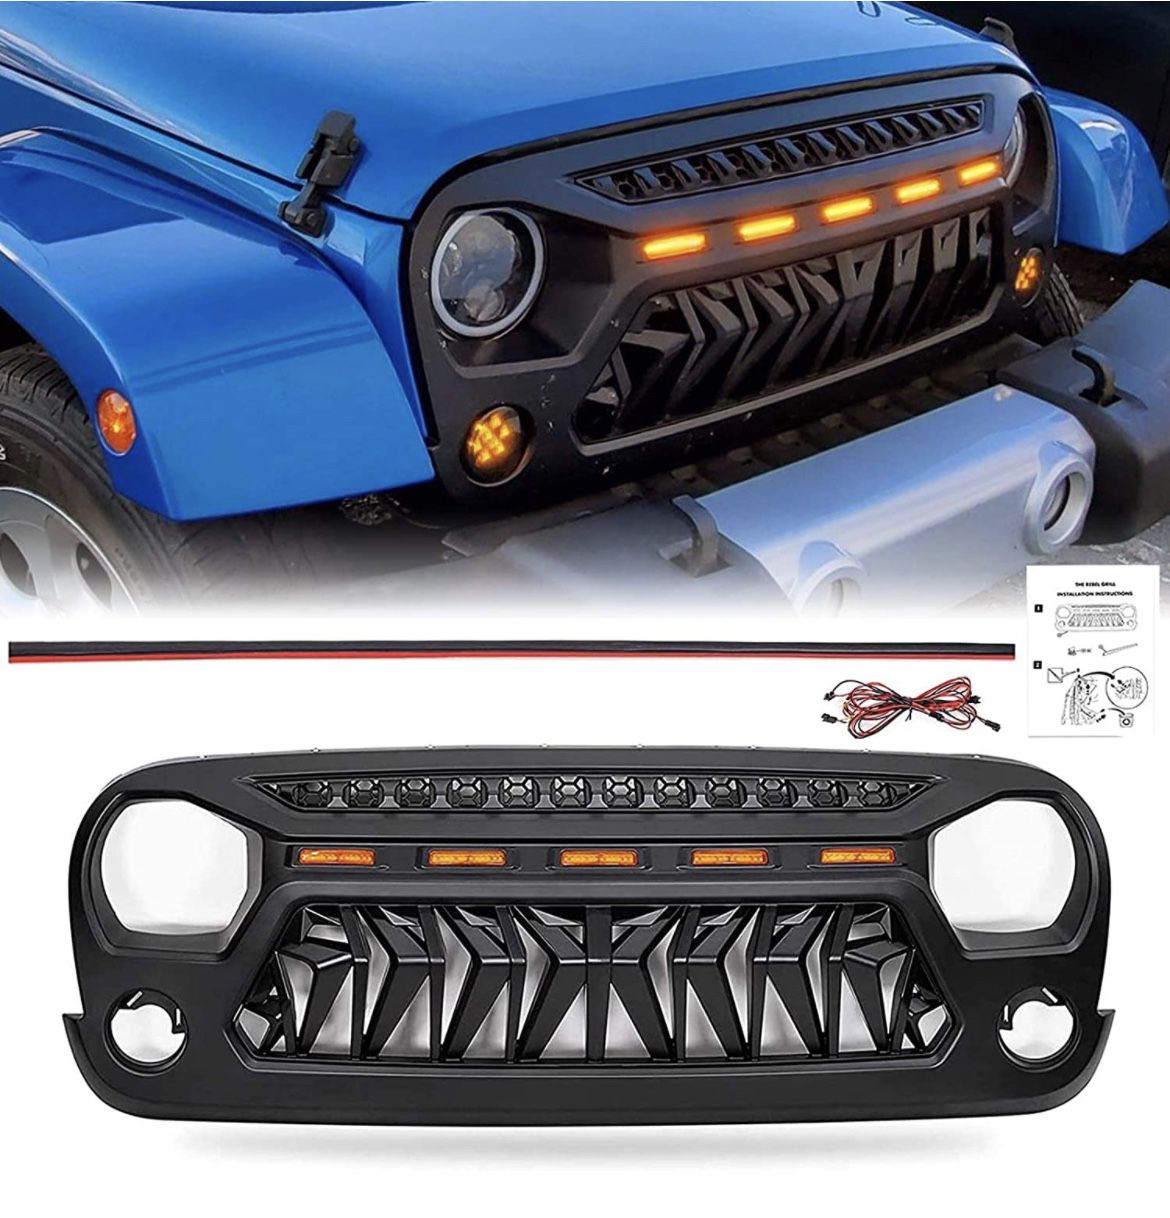 Haitzu Shark Grill Fit for Jeep Wrangler 2007-2018 JK Accessories, Matte  Black Grille with 5 Amber Lights Including JKU Unlimited Rubicon Sahara  Sport for Sale in Montclair, CA - OfferUp